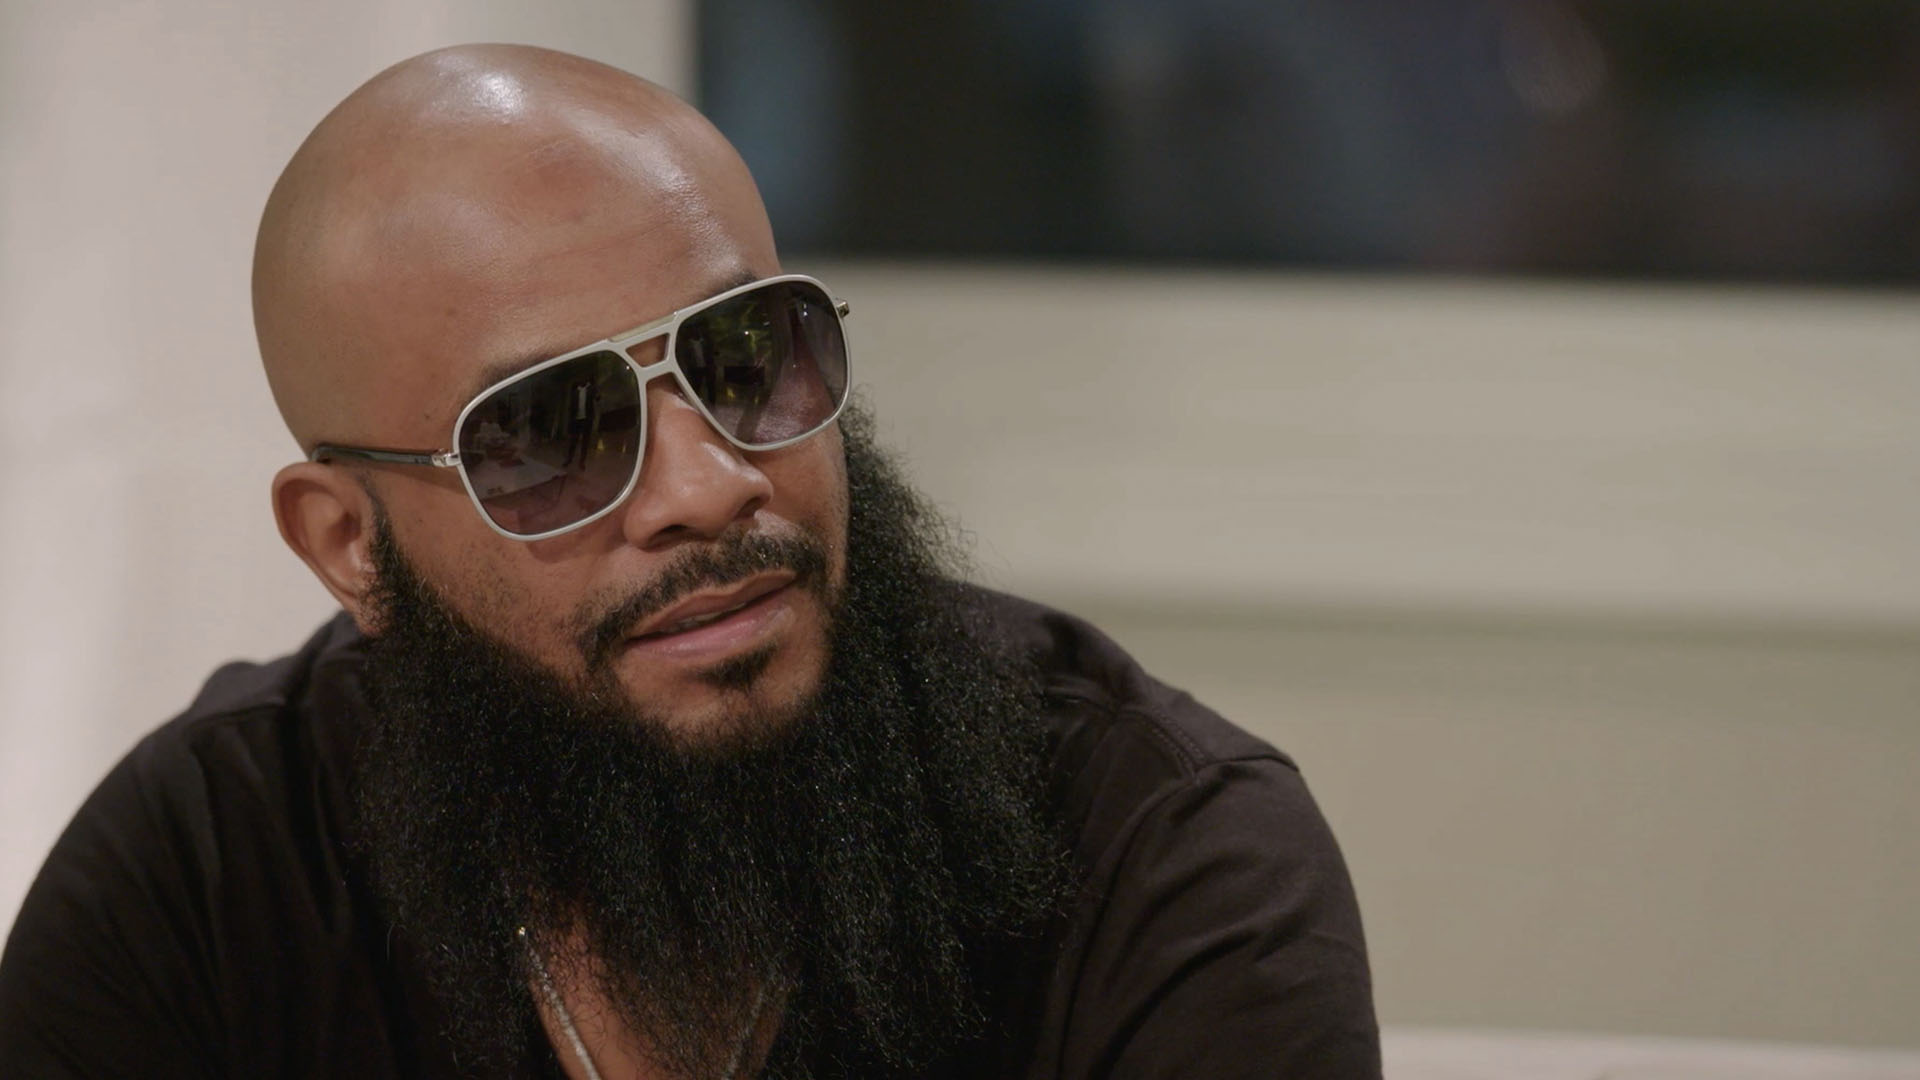 Watch #HipHopBootCamp MVP of the Week: Tuff! | Marriage Boot Camp: Hip Hop Edition Video Extras